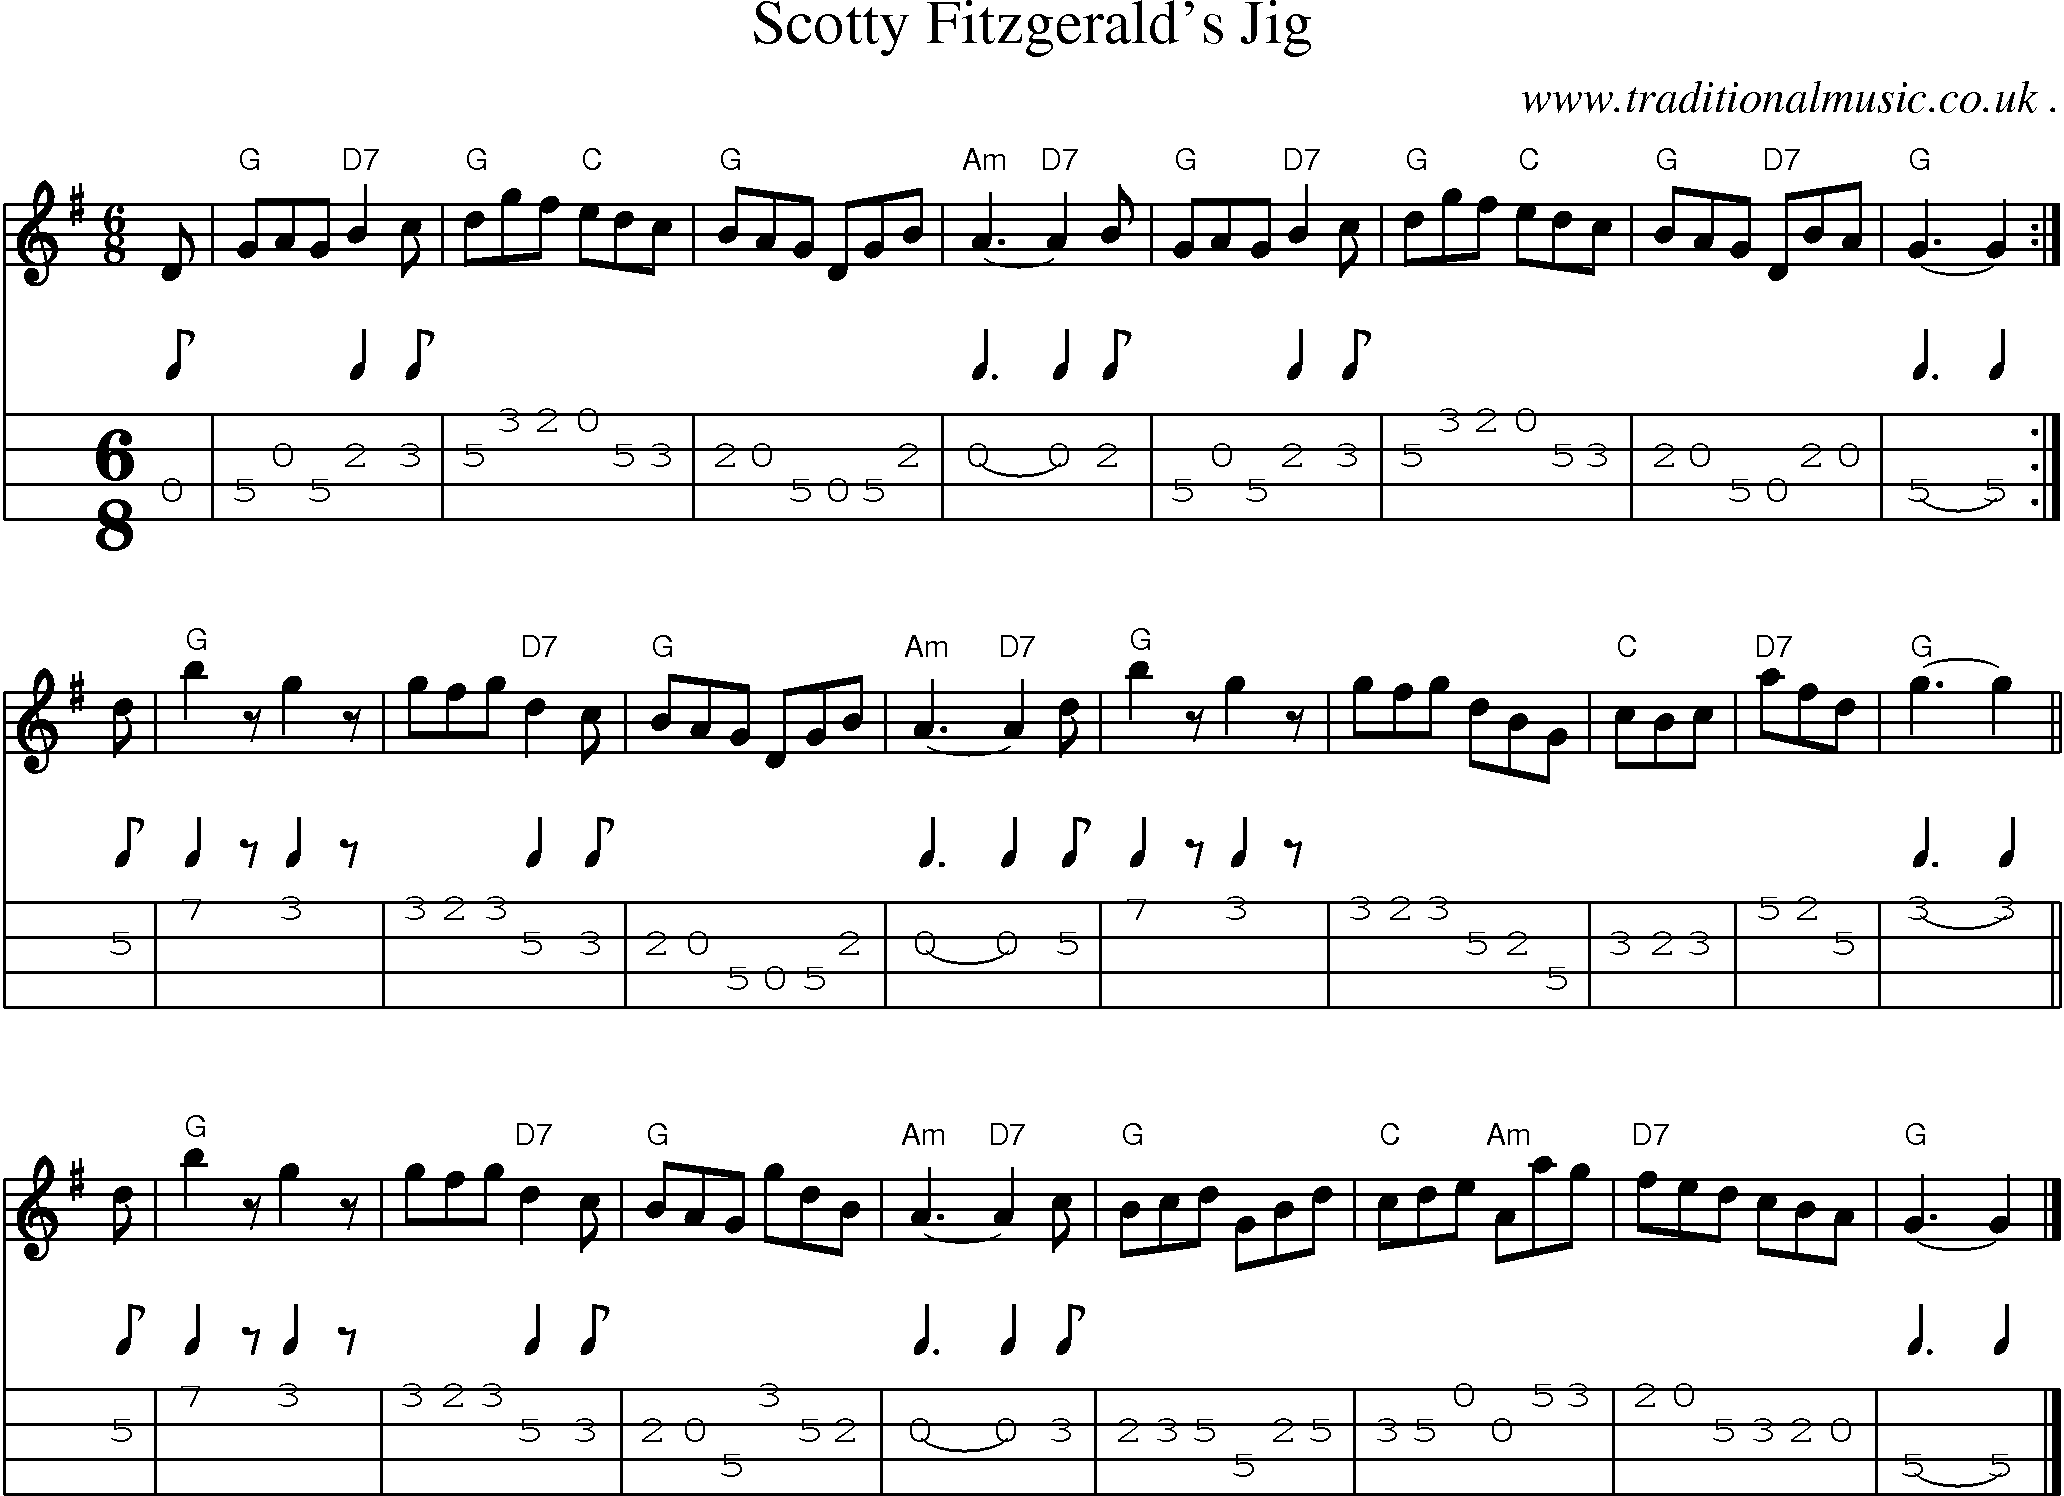 Sheet-music  score, Chords and Mandolin Tabs for Scotty Fitzgeralds Jig